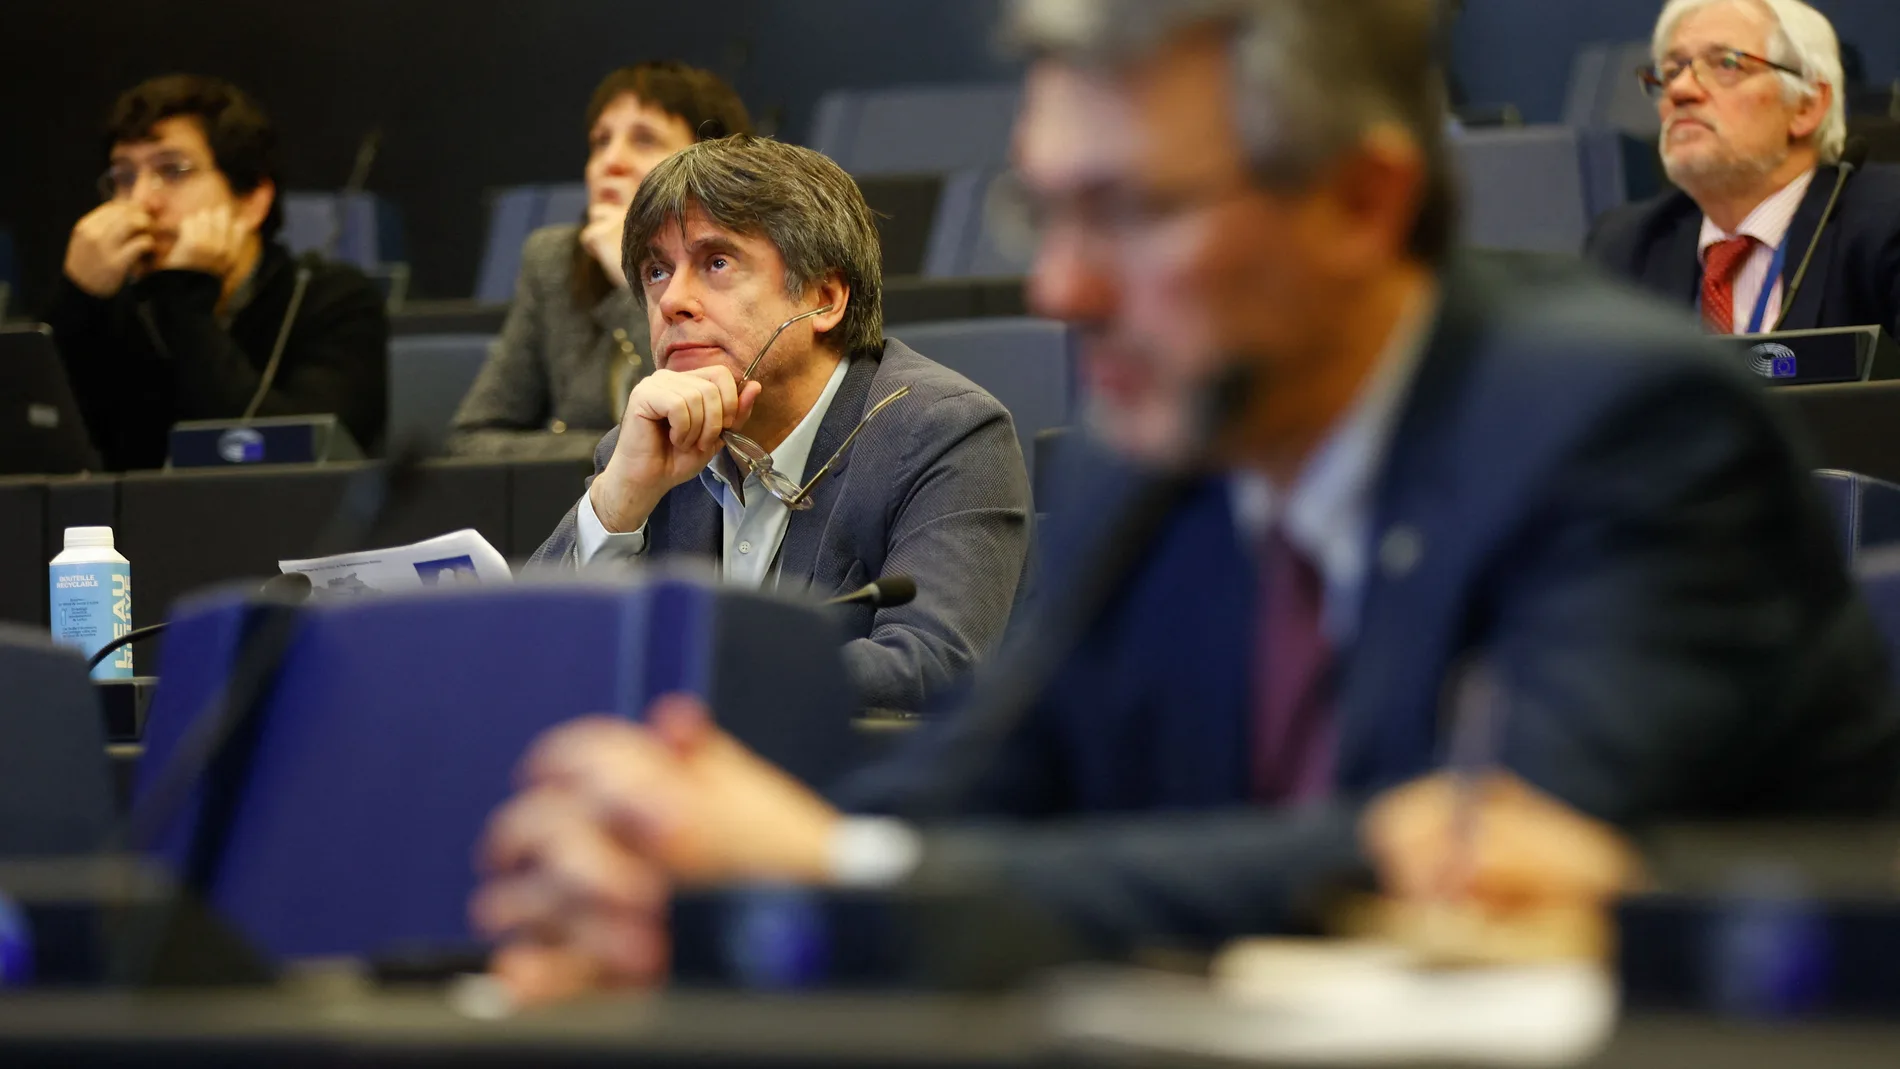 Carles Puigdemont in the Minority Intergroup meeting in the European Parliament Strasbourg. Photograph By Mathieu Cugnot.